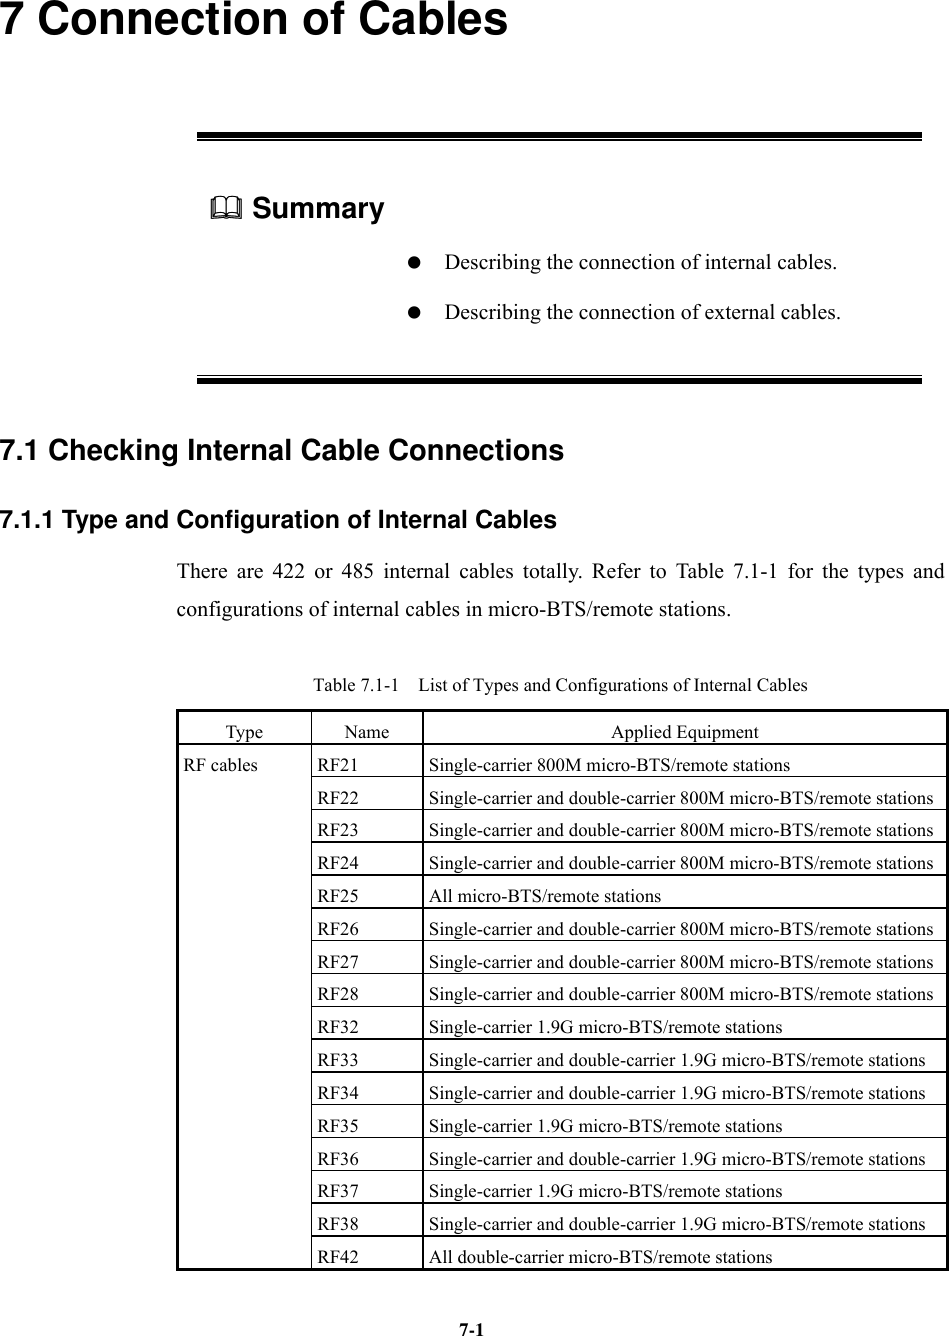   7-17 Connection of Cables  Summary      Describing the connection of internal cables.    Describing the connection of external cables. 7.1 Checking Internal Cable Connections 7.1.1 Type and Configuration of Internal Cables There are 422 or 485 internal cables totally. Refer to Table 7.1-1 for the types and configurations of internal cables in micro-BTS/remote stations. Table 7.1-1    List of Types and Configurations of Internal Cables Type Name  Applied Equipment RF21  Single-carrier 800M micro-BTS/remote stations RF22  Single-carrier and double-carrier 800M micro-BTS/remote stationsRF23  Single-carrier and double-carrier 800M micro-BTS/remote stationsRF24  Single-carrier and double-carrier 800M micro-BTS/remote stationsRF25  All micro-BTS/remote stations RF26  Single-carrier and double-carrier 800M micro-BTS/remote stationsRF27  Single-carrier and double-carrier 800M micro-BTS/remote stationsRF28  Single-carrier and double-carrier 800M micro-BTS/remote stationsRF32  Single-carrier 1.9G micro-BTS/remote stations RF33  Single-carrier and double-carrier 1.9G micro-BTS/remote stations RF34  Single-carrier and double-carrier 1.9G micro-BTS/remote stations RF35  Single-carrier 1.9G micro-BTS/remote stations RF36  Single-carrier and double-carrier 1.9G micro-BTS/remote stations RF37  Single-carrier 1.9G micro-BTS/remote stations RF38  Single-carrier and double-carrier 1.9G micro-BTS/remote stations RF cables RF42  All double-carrier micro-BTS/remote stations 